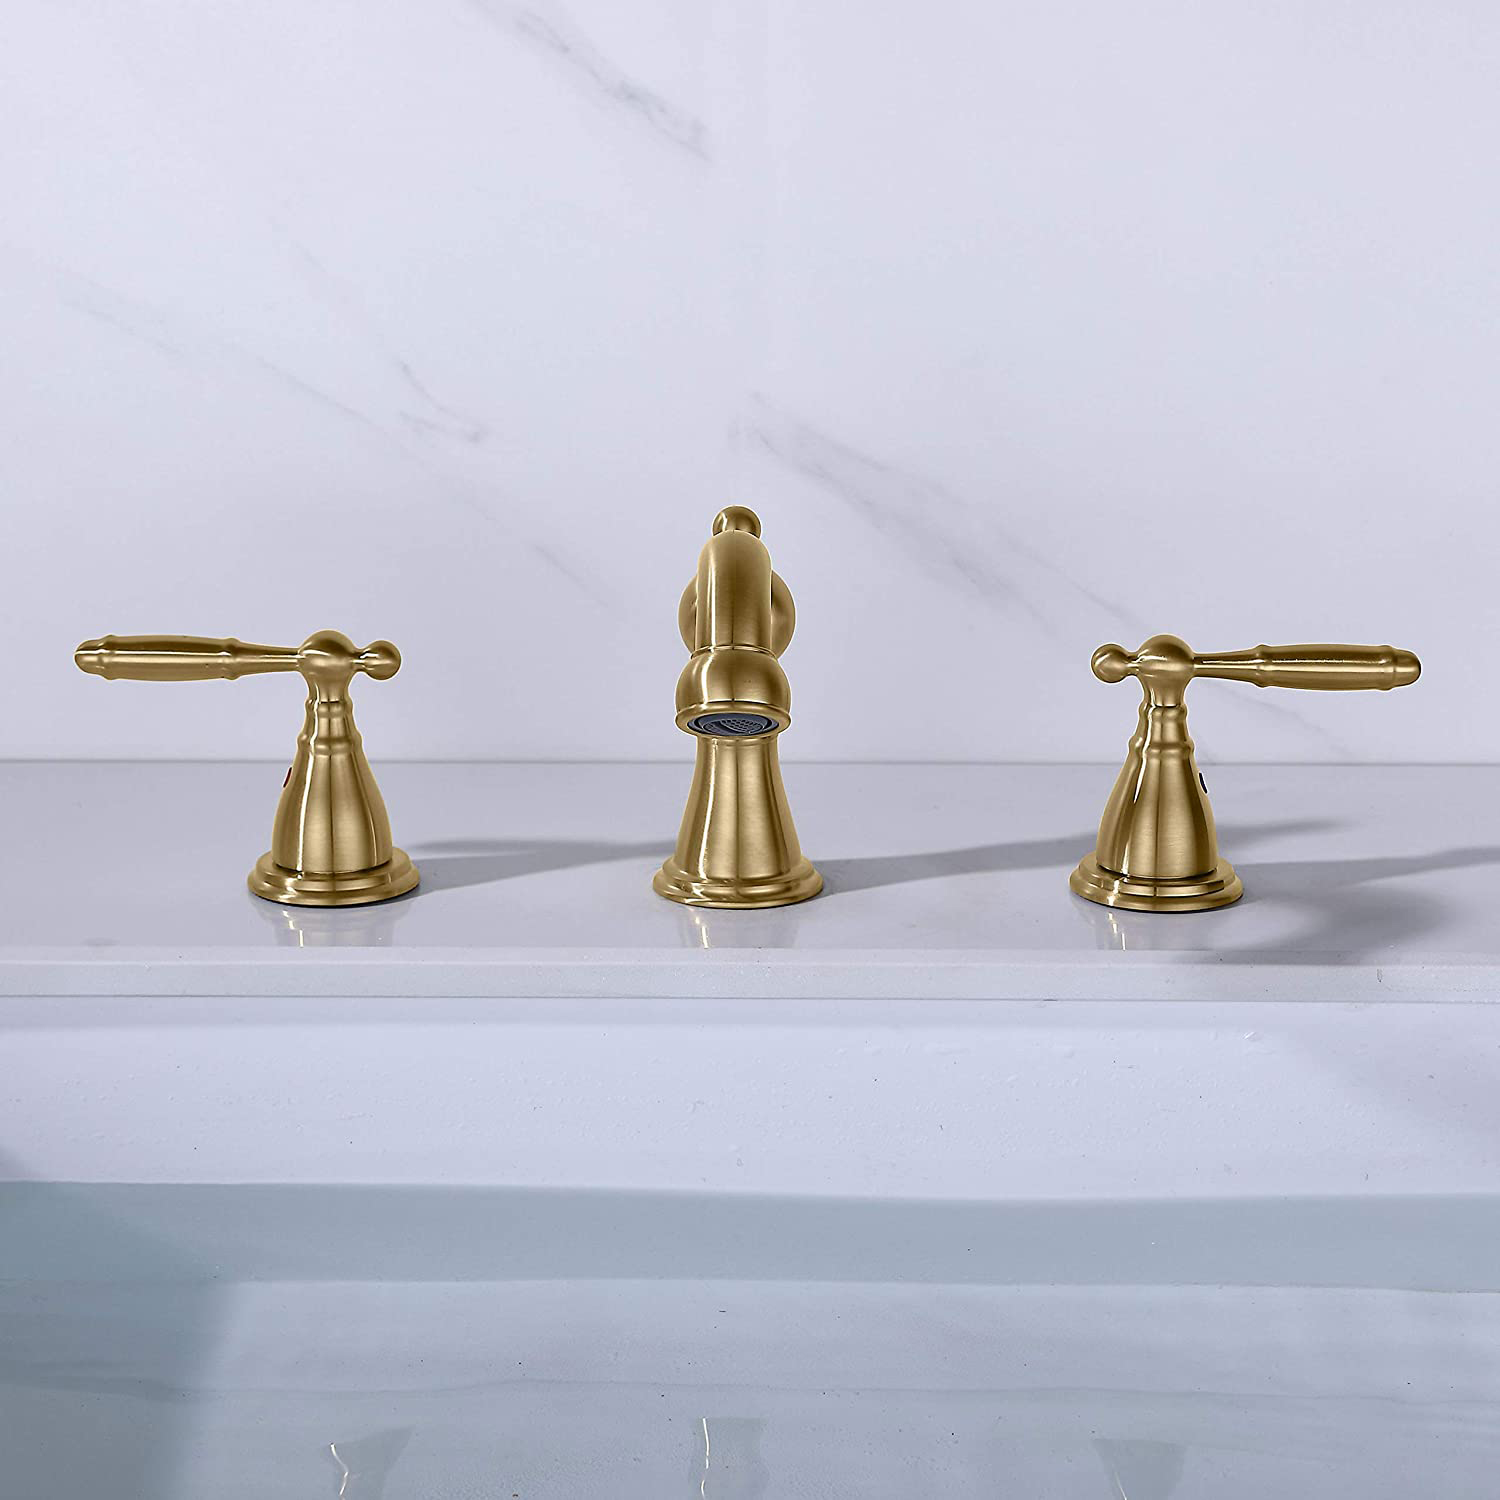 Aquacubic Modern Bathroom Sink Faucet 3 Holes 8 Inch Widespread Brushed Gold Assembly Basin Faucet Tap